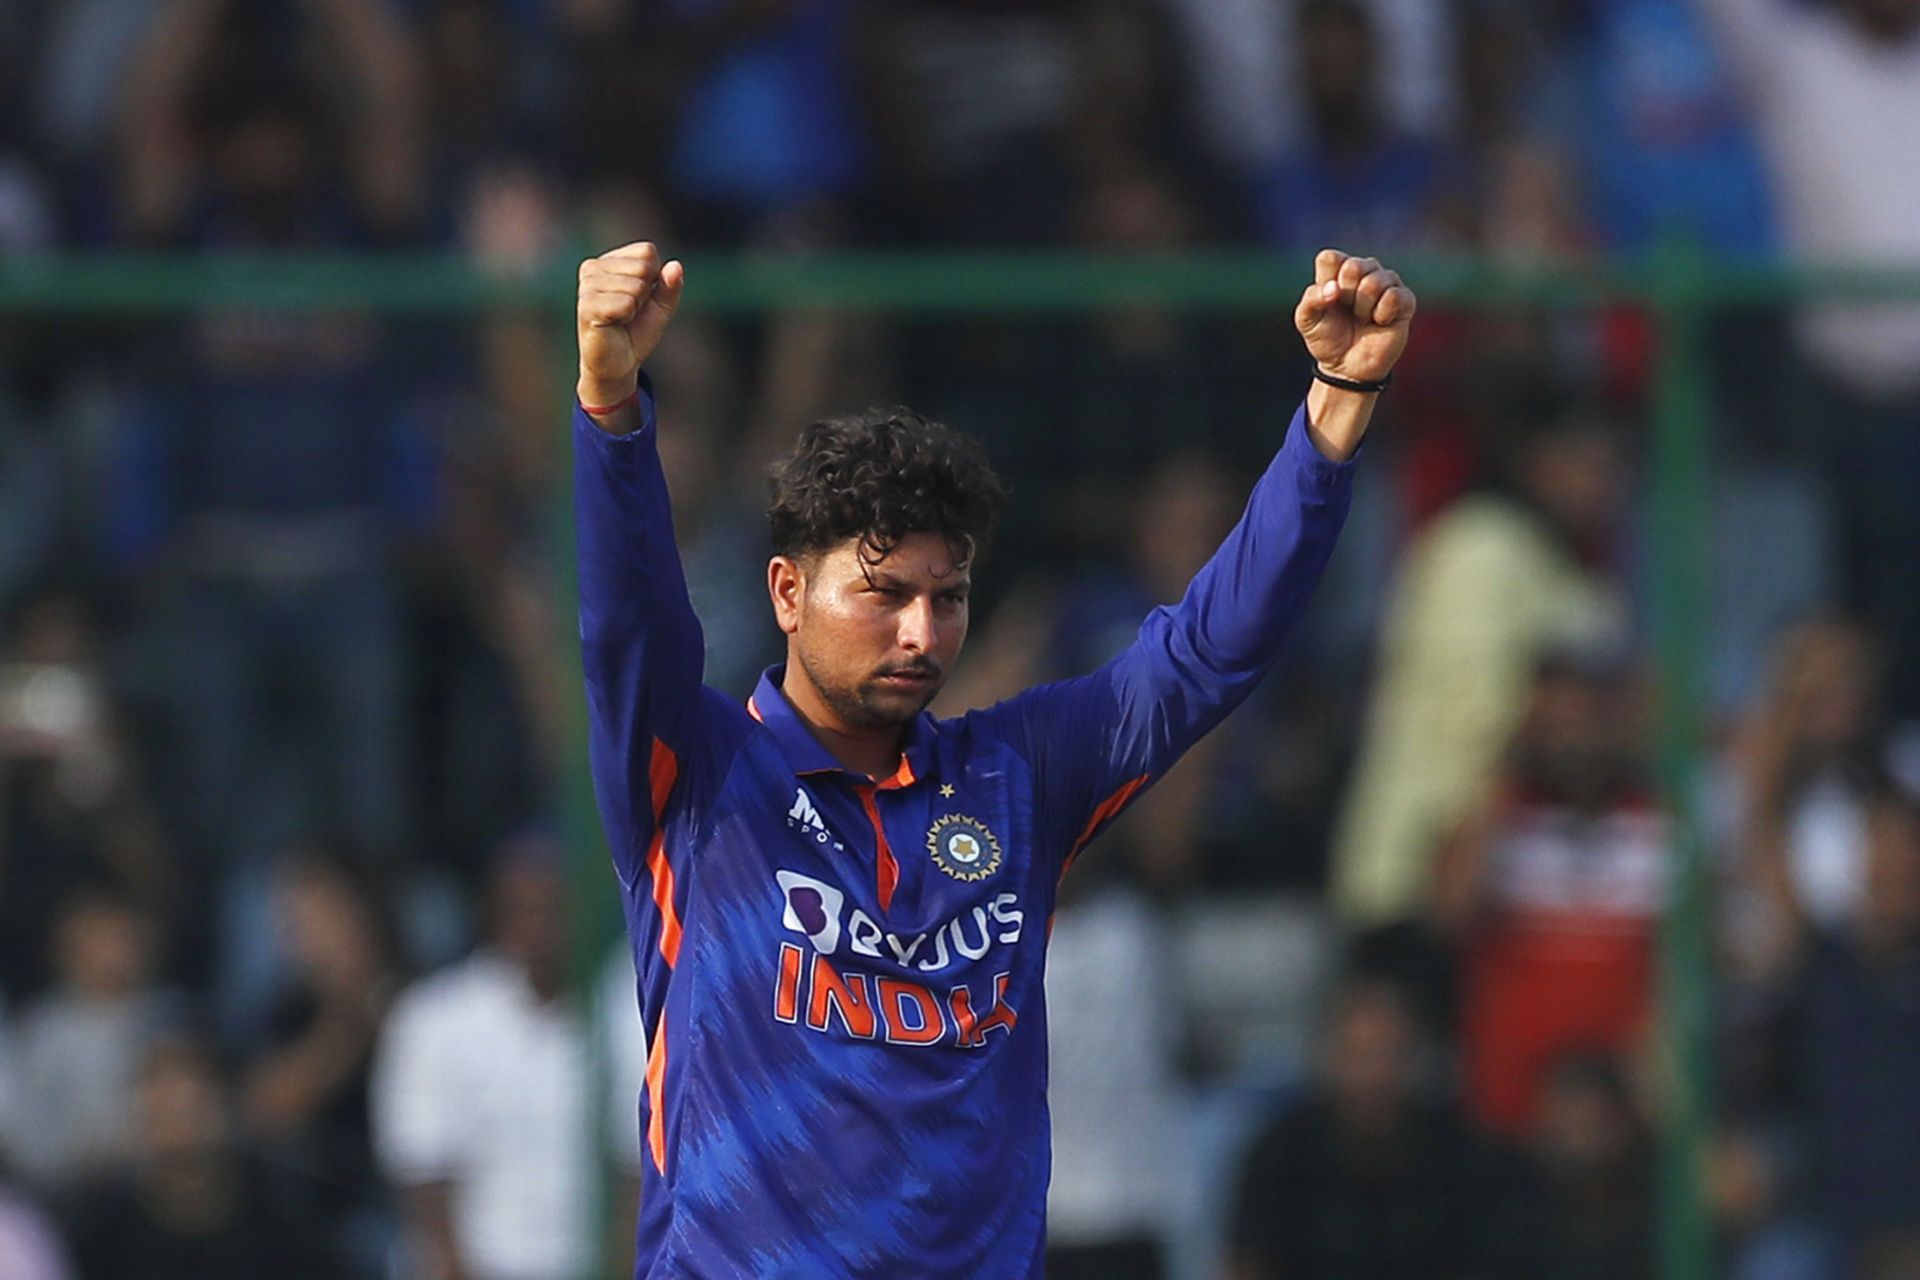 Kuldeep Yadav was the only Indian bowler to bowl his full quota of 10 overs.